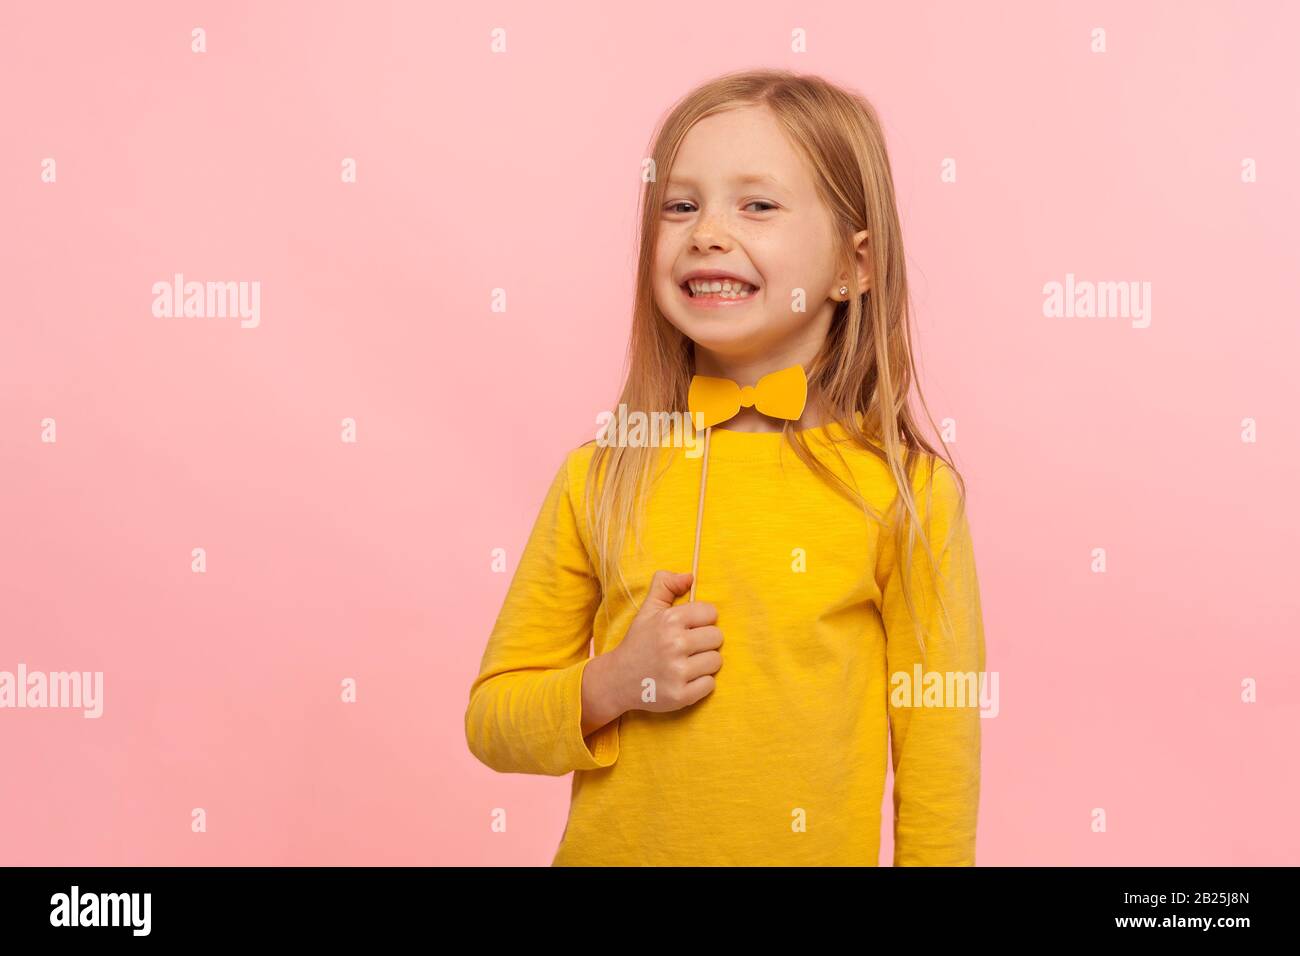 Portrait of charming playful little ginger girl holding paper bow tie and looking at camera with toothy smile, having fun, wearing masquerade accessor Stock Photo